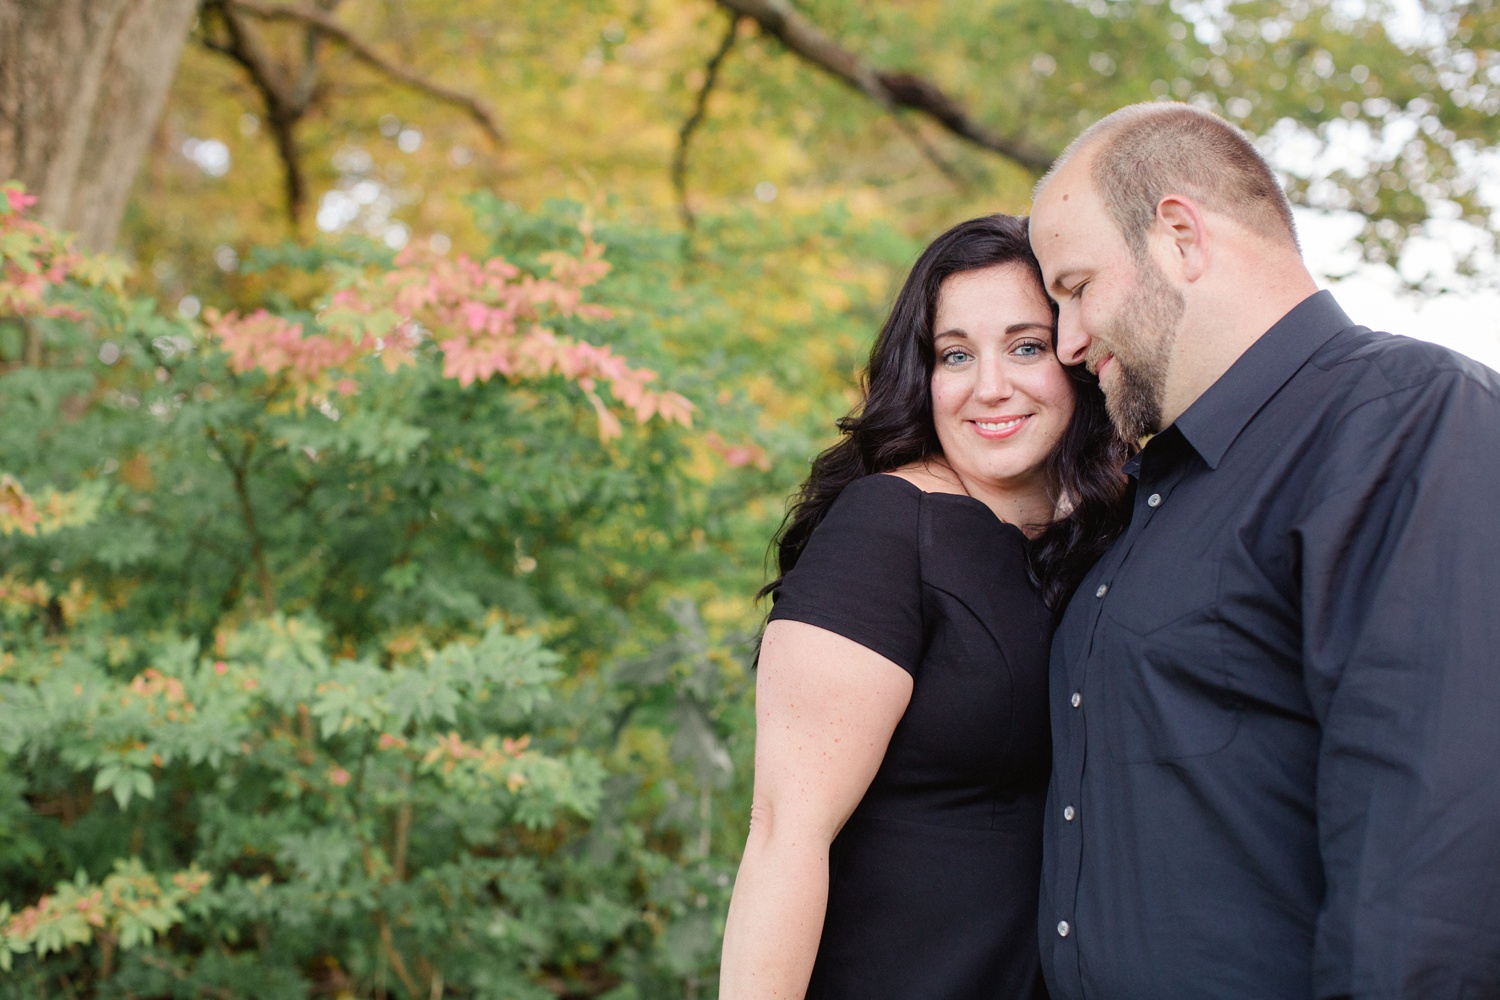 Moscow PA Fall Engagement Session_0046.jpg